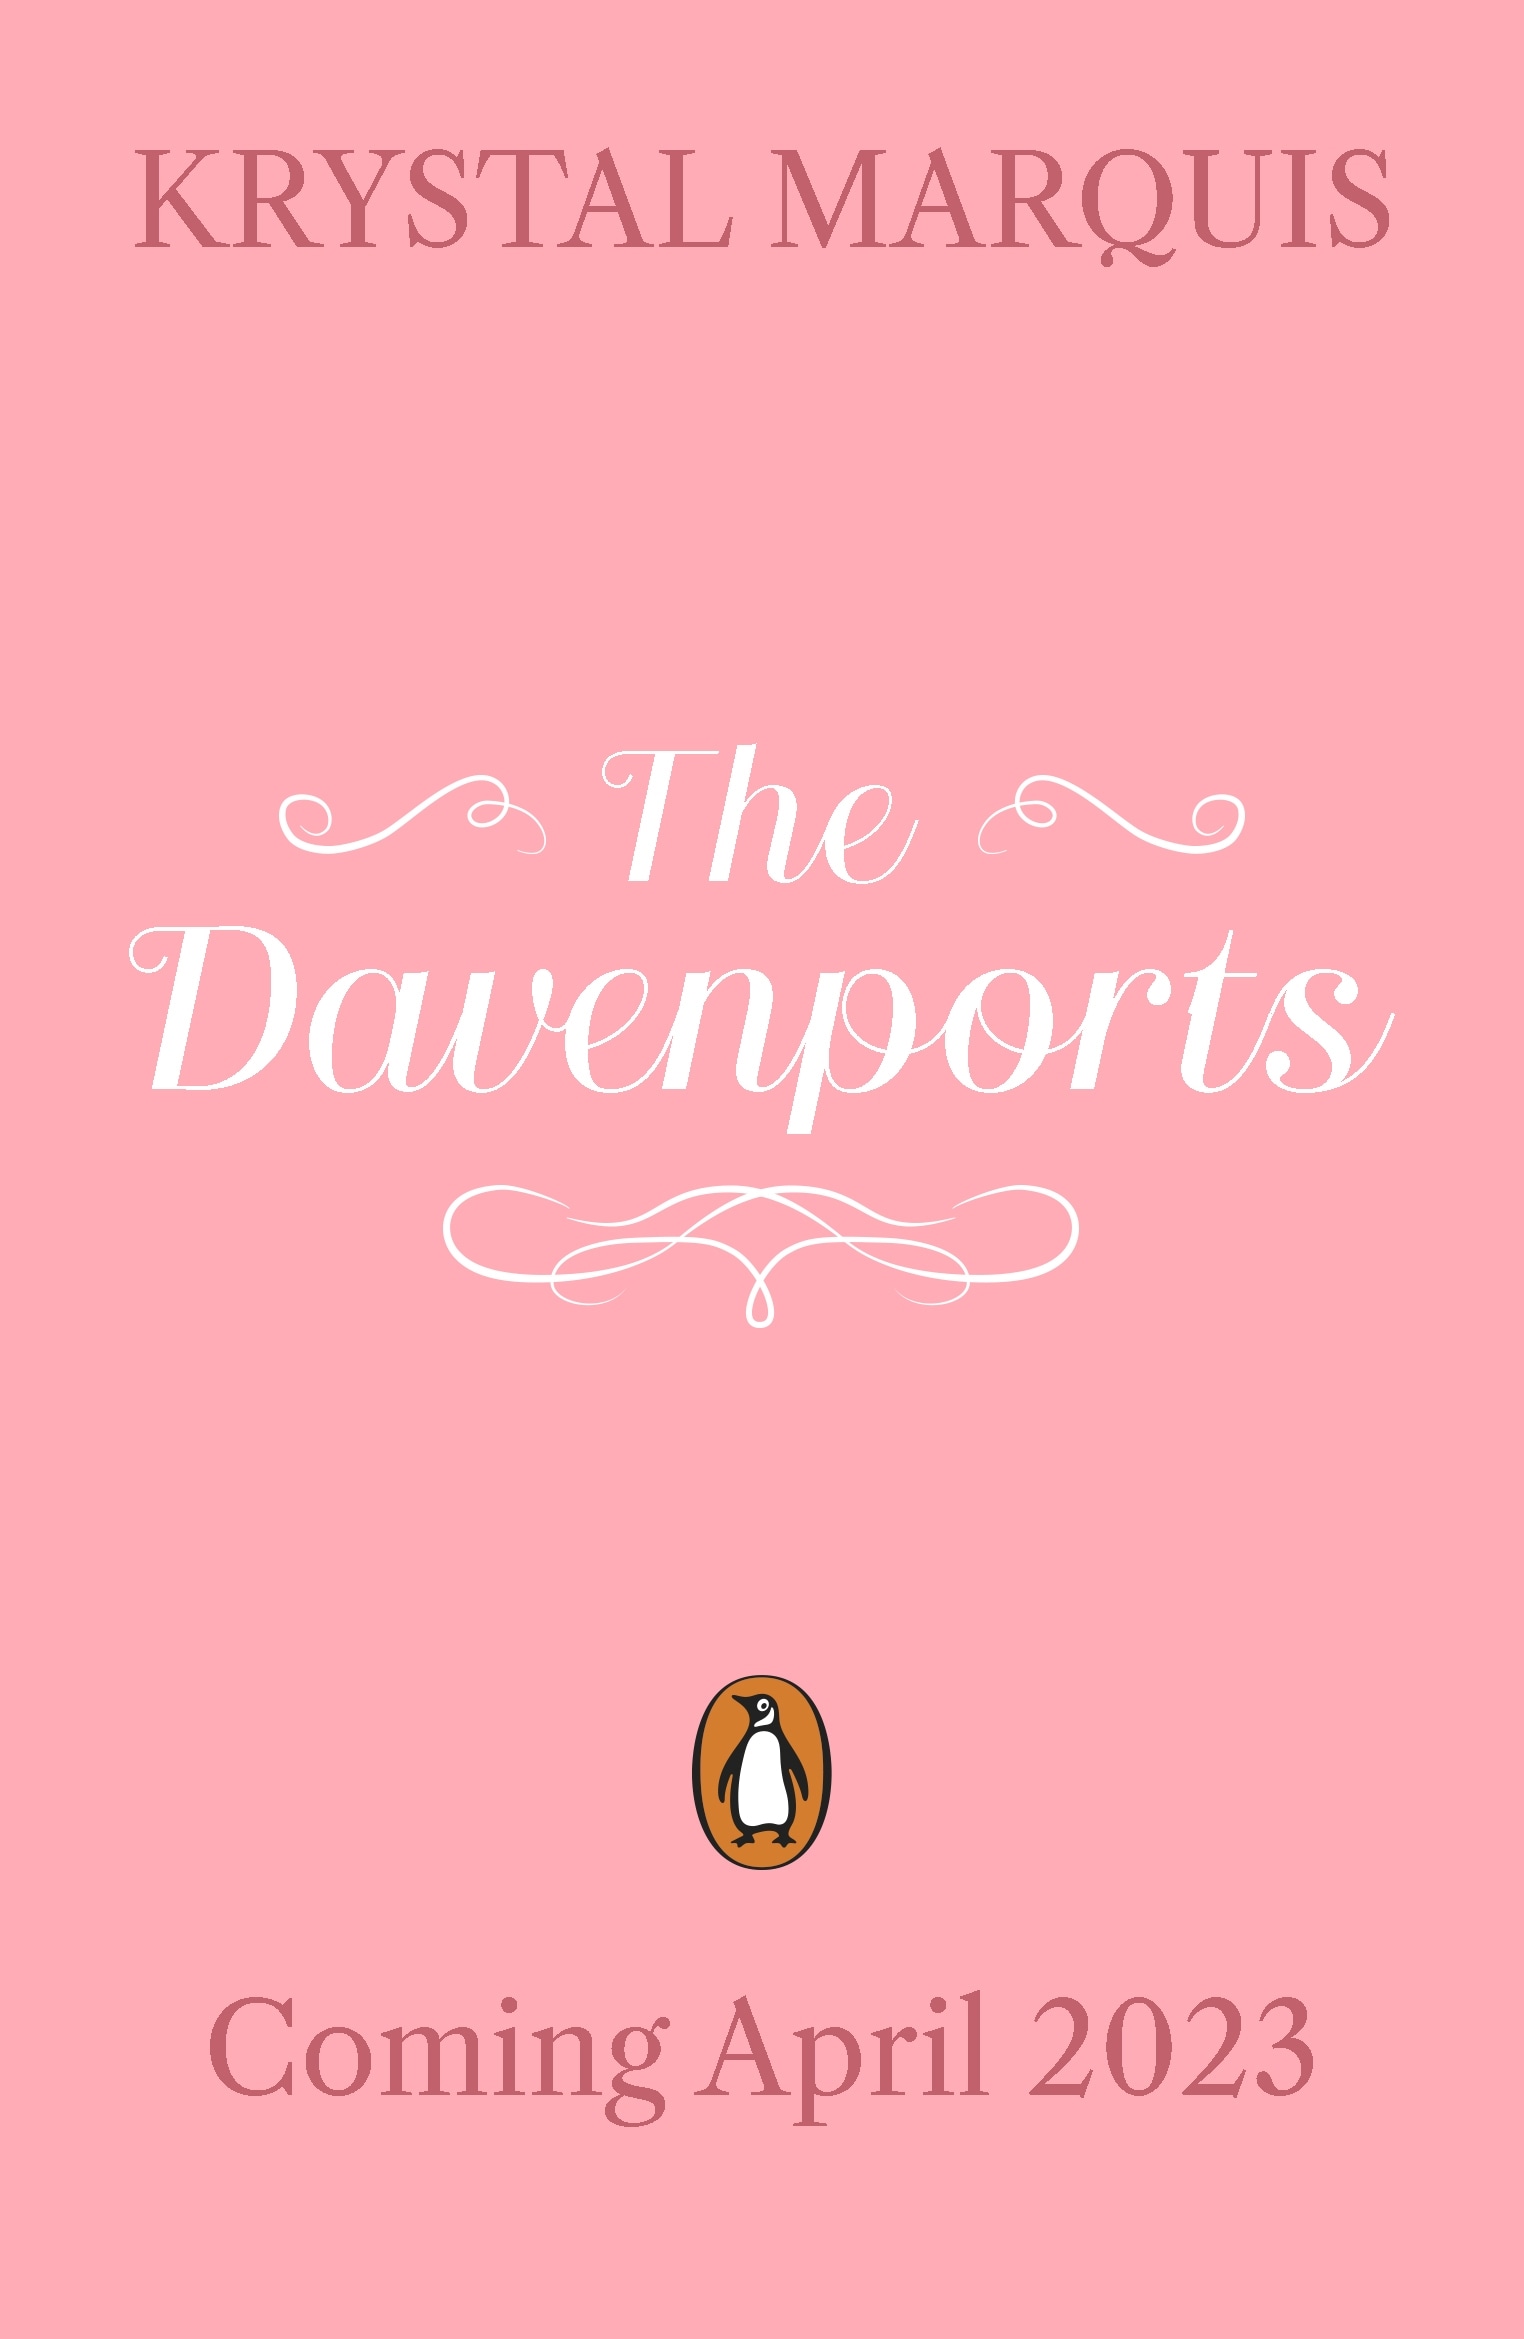 Book “The Davenports” by Krystal Marquis — February 2, 2023